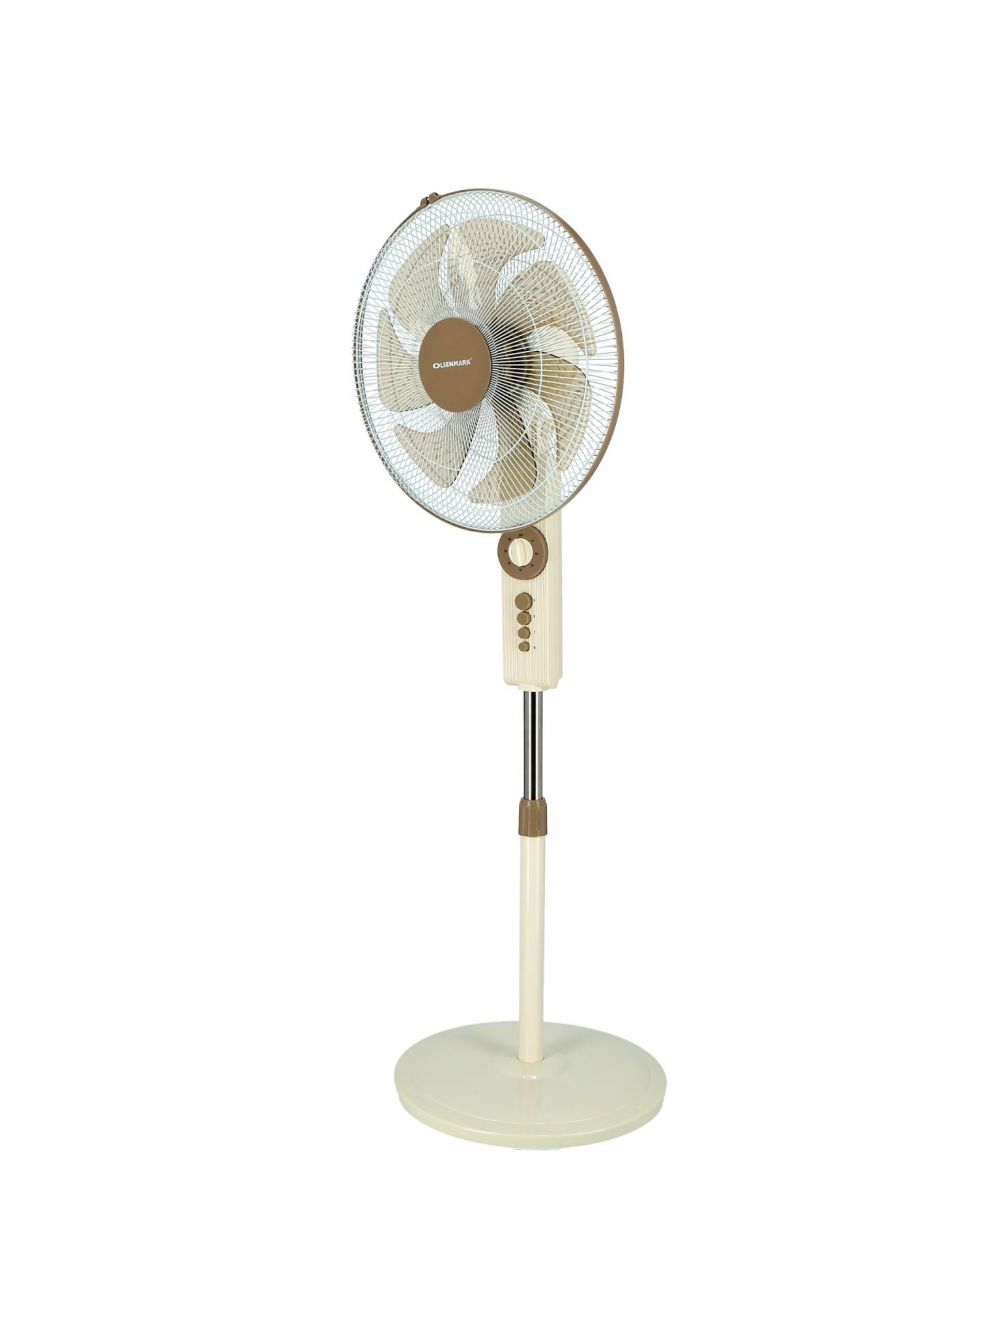 Olsenmark Rechargeable Stand Fan, 18 Inch - Super Quiet Copper Motor - 3 Speed Setting - 7 Leaf Blade